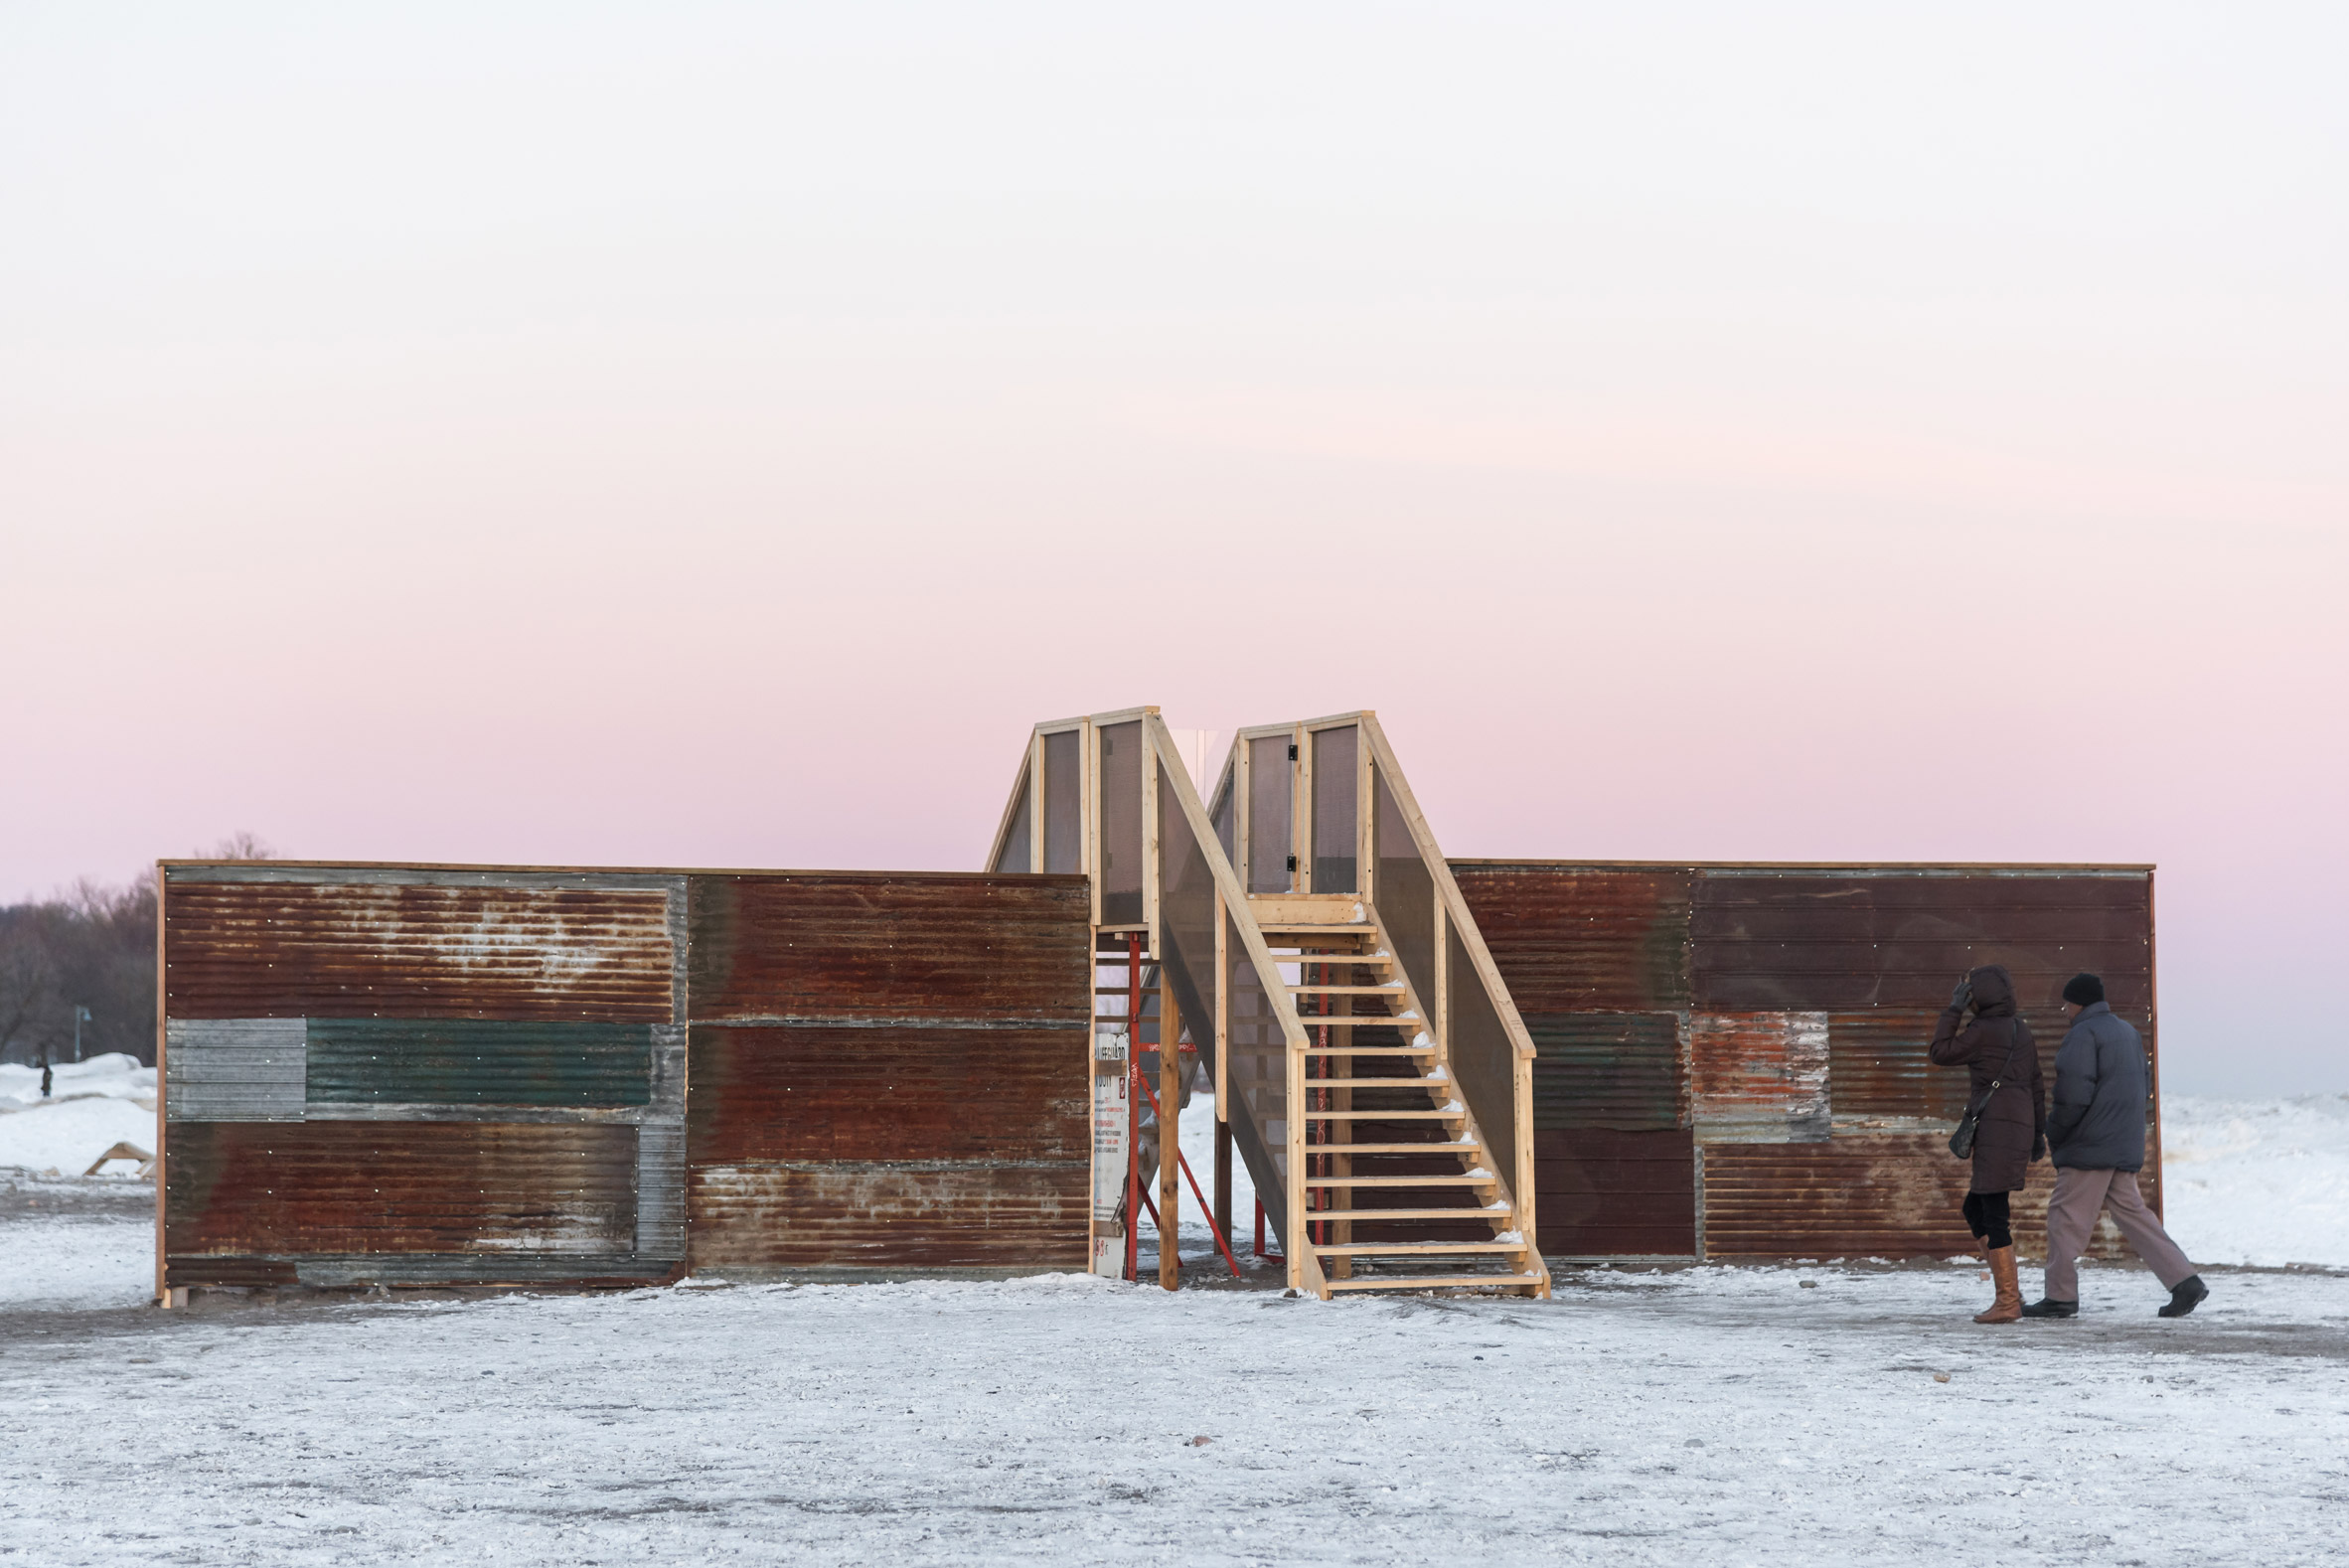 Above the Wall installation by Joshua Carel and Adelle York for Winter Stations Toronto 2019